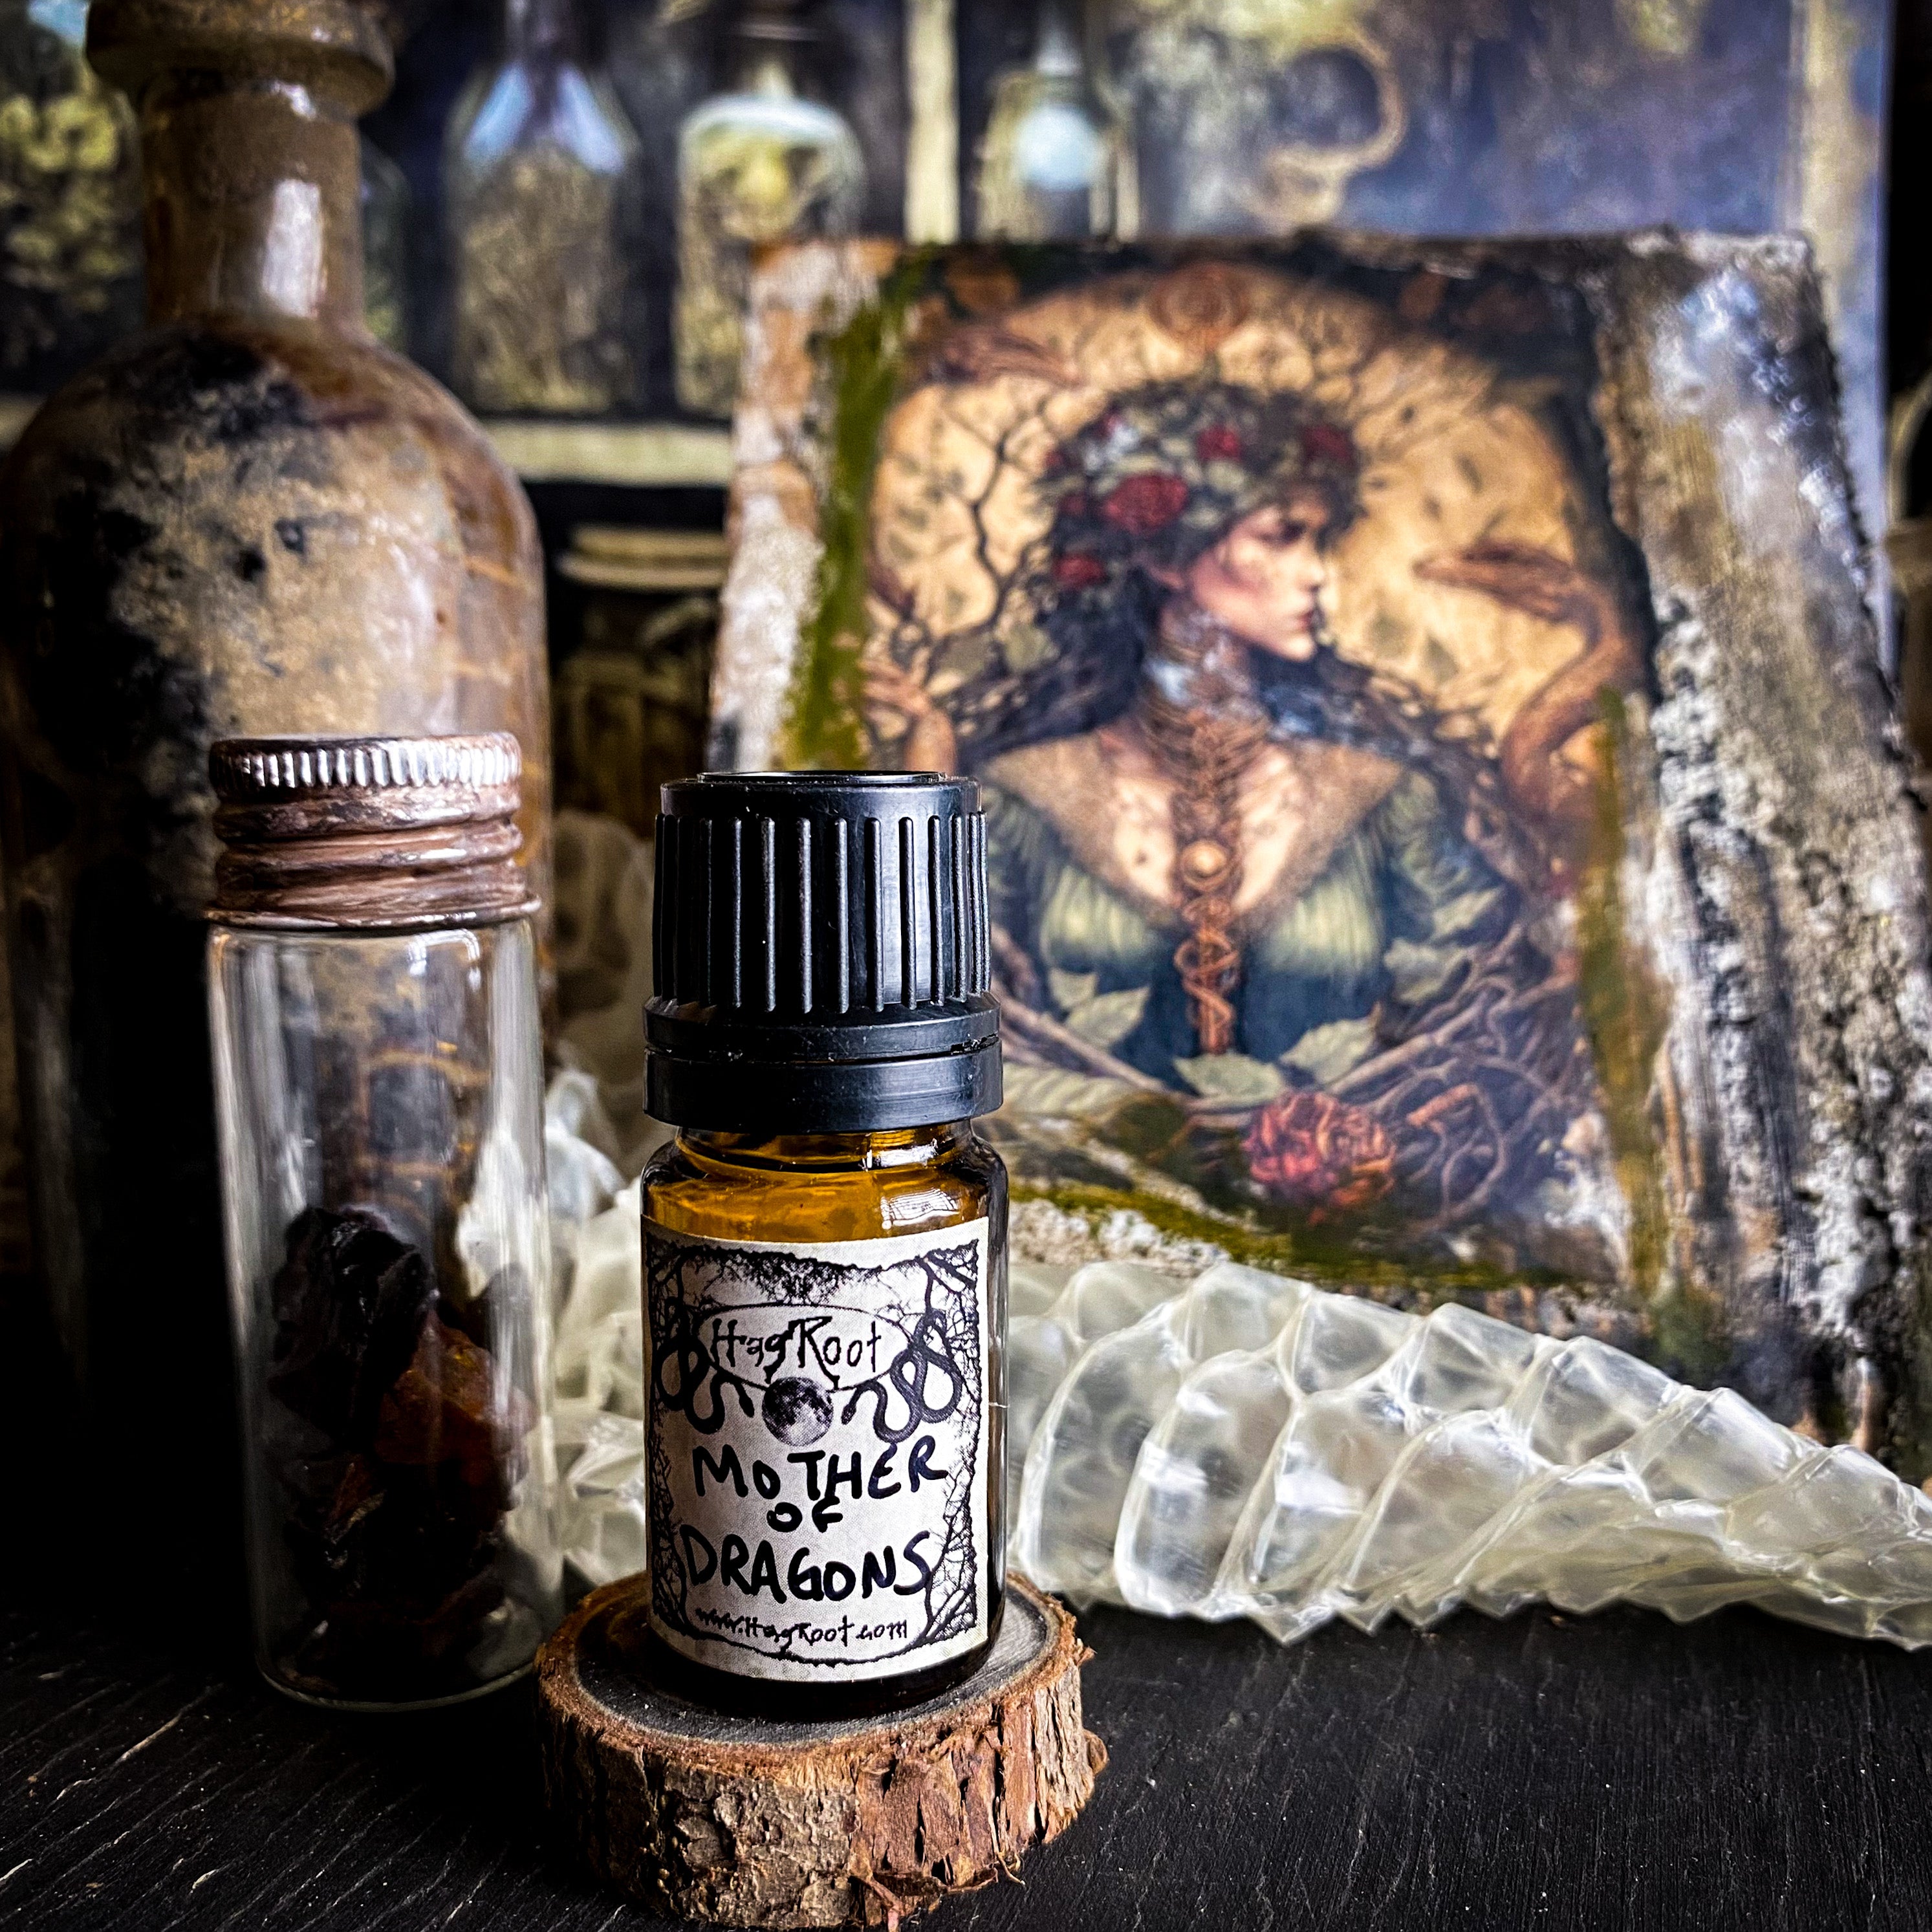 MOTHER OF DRAGONS-(Dragons Blood, Moss, Charred Birch, Smoked Marshmallow, Hawthorn Berry)-Perfume, Cologne, Anointing, Ritual Oil